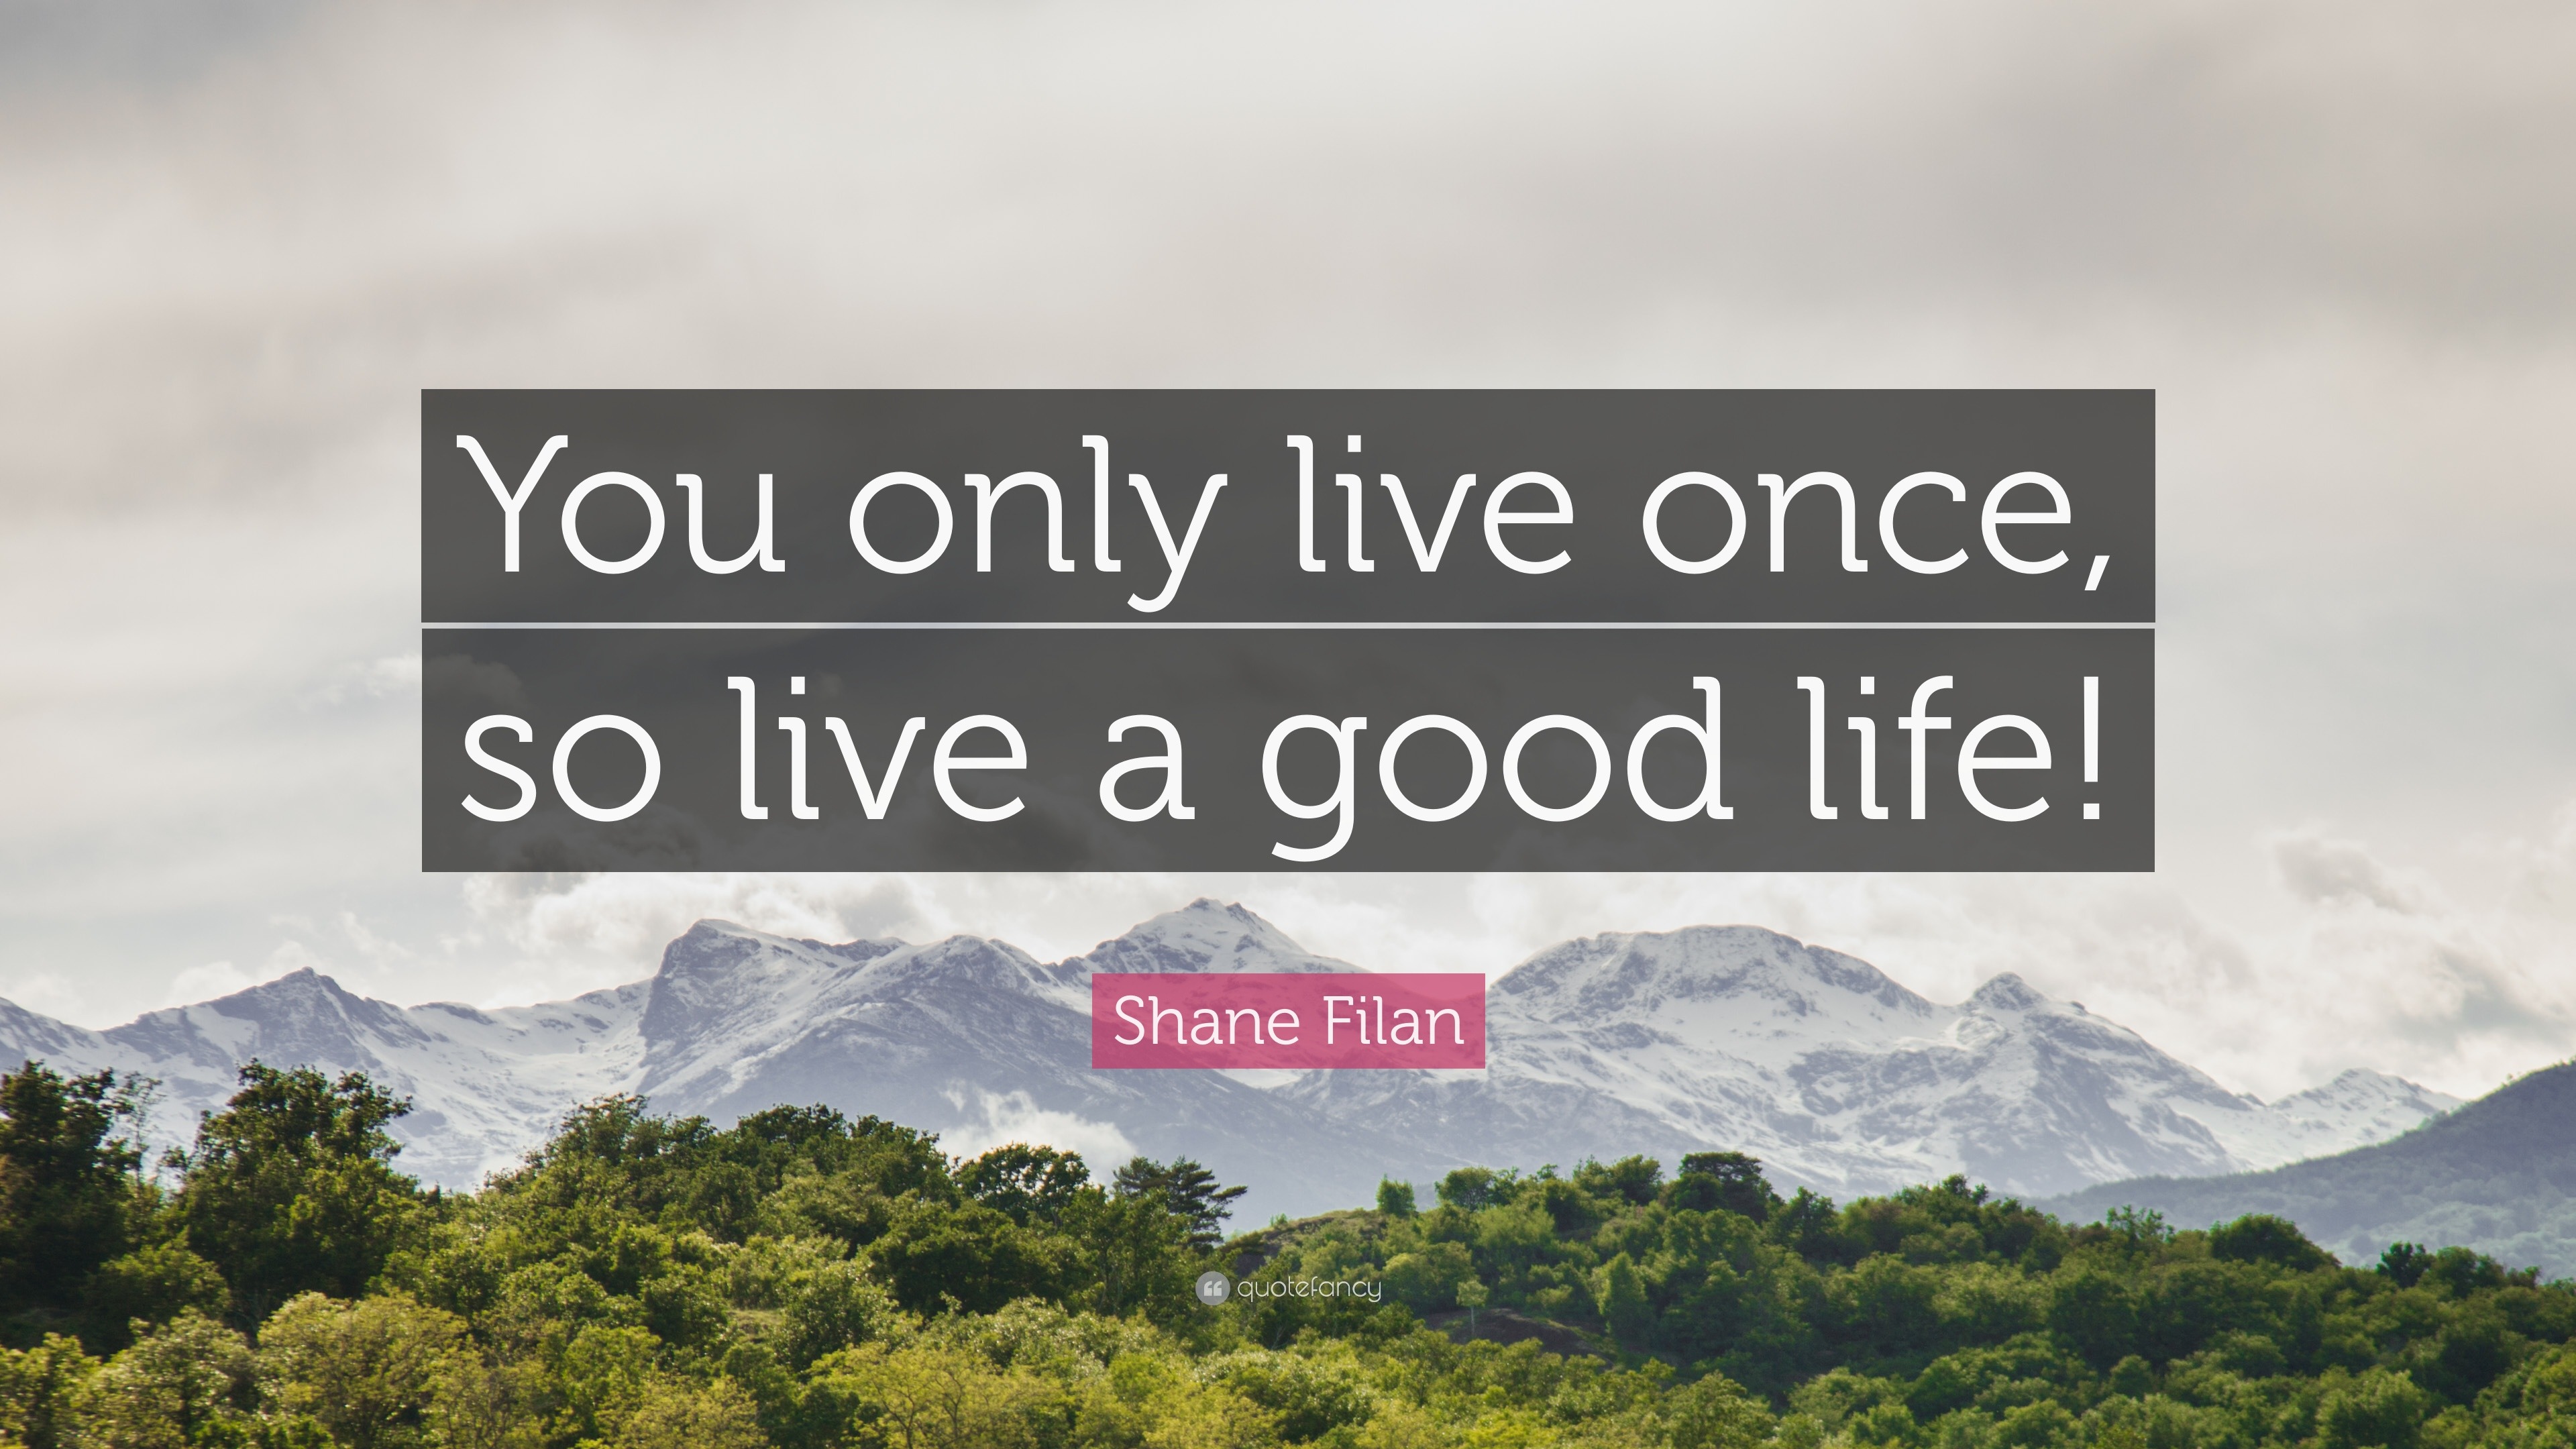 Shane Filan Quote “You only live once so live a good life